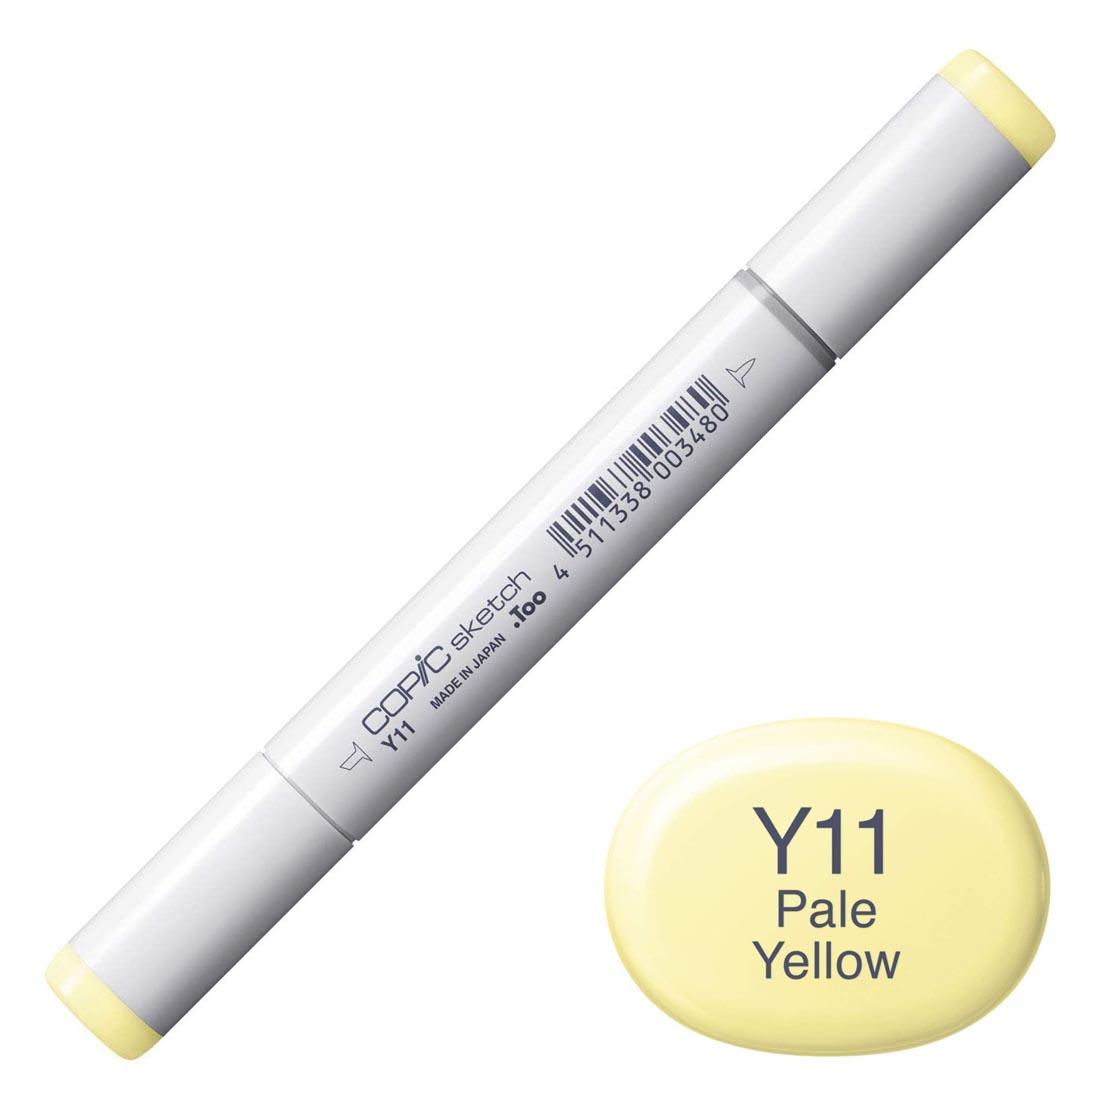 COPIC Sketch Marker with a color swatch and text of Y11 Pale Yellow